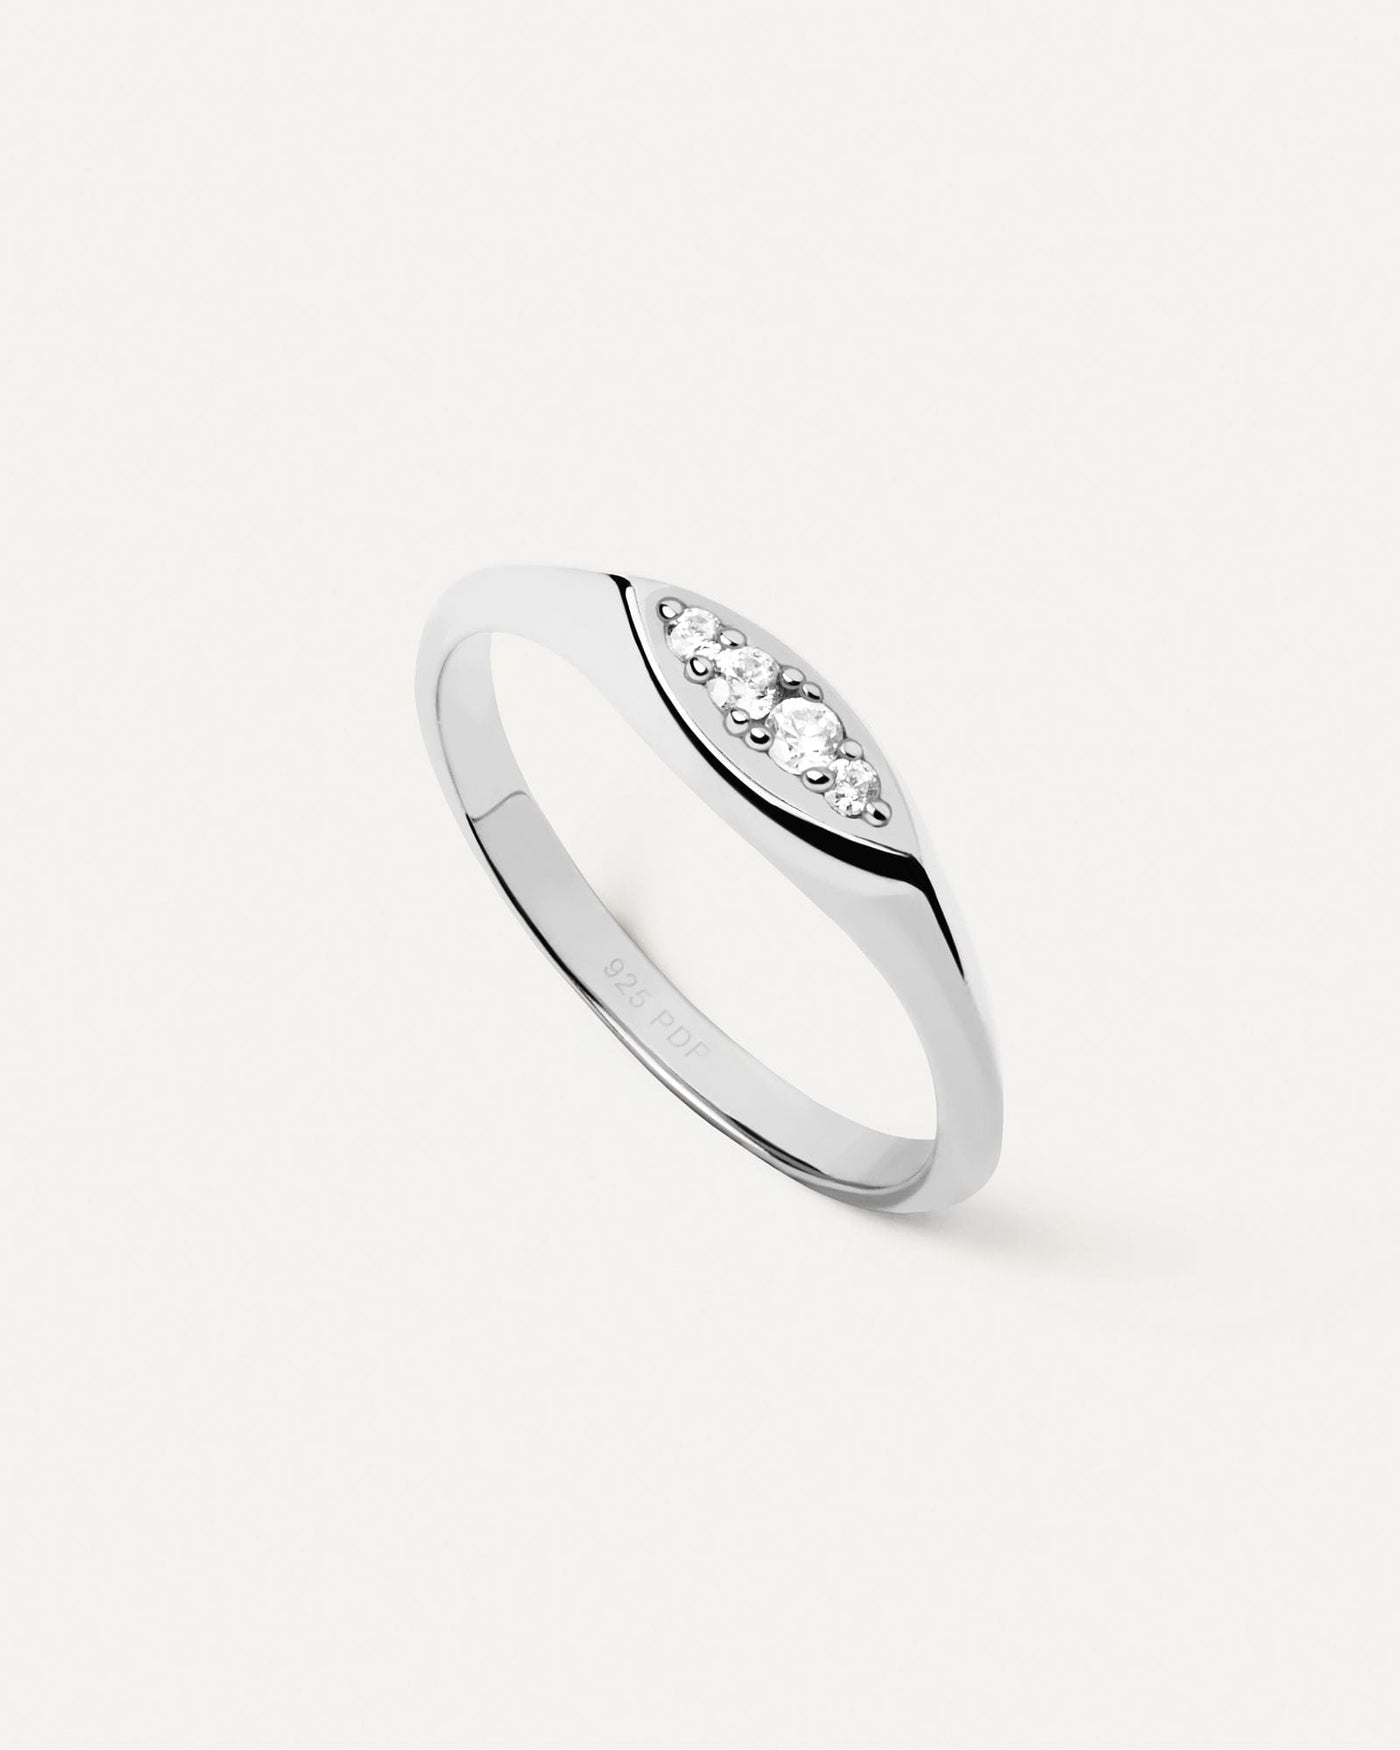 2024 Selection |  Gala Stamp Silver Ring. Sterling silver slim signet ring set with eye shape white zirconia multi-stone cluster. Get the latest arrival from PDPAOLA. Place your order safely and get this Best Seller. Free Shipping.